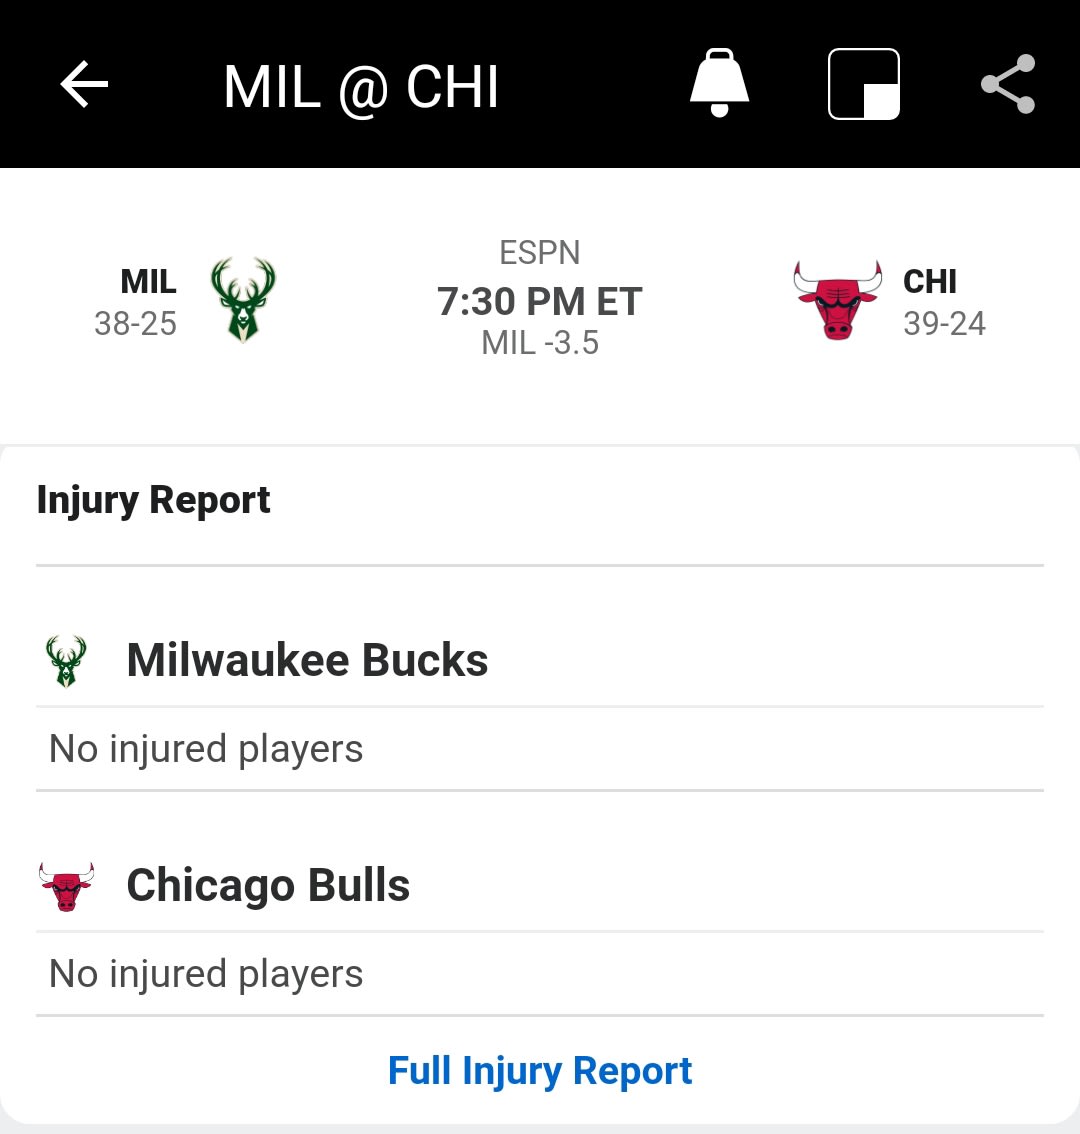 TMW the ESPN injury report makes you think you've woken up in an alternate universe